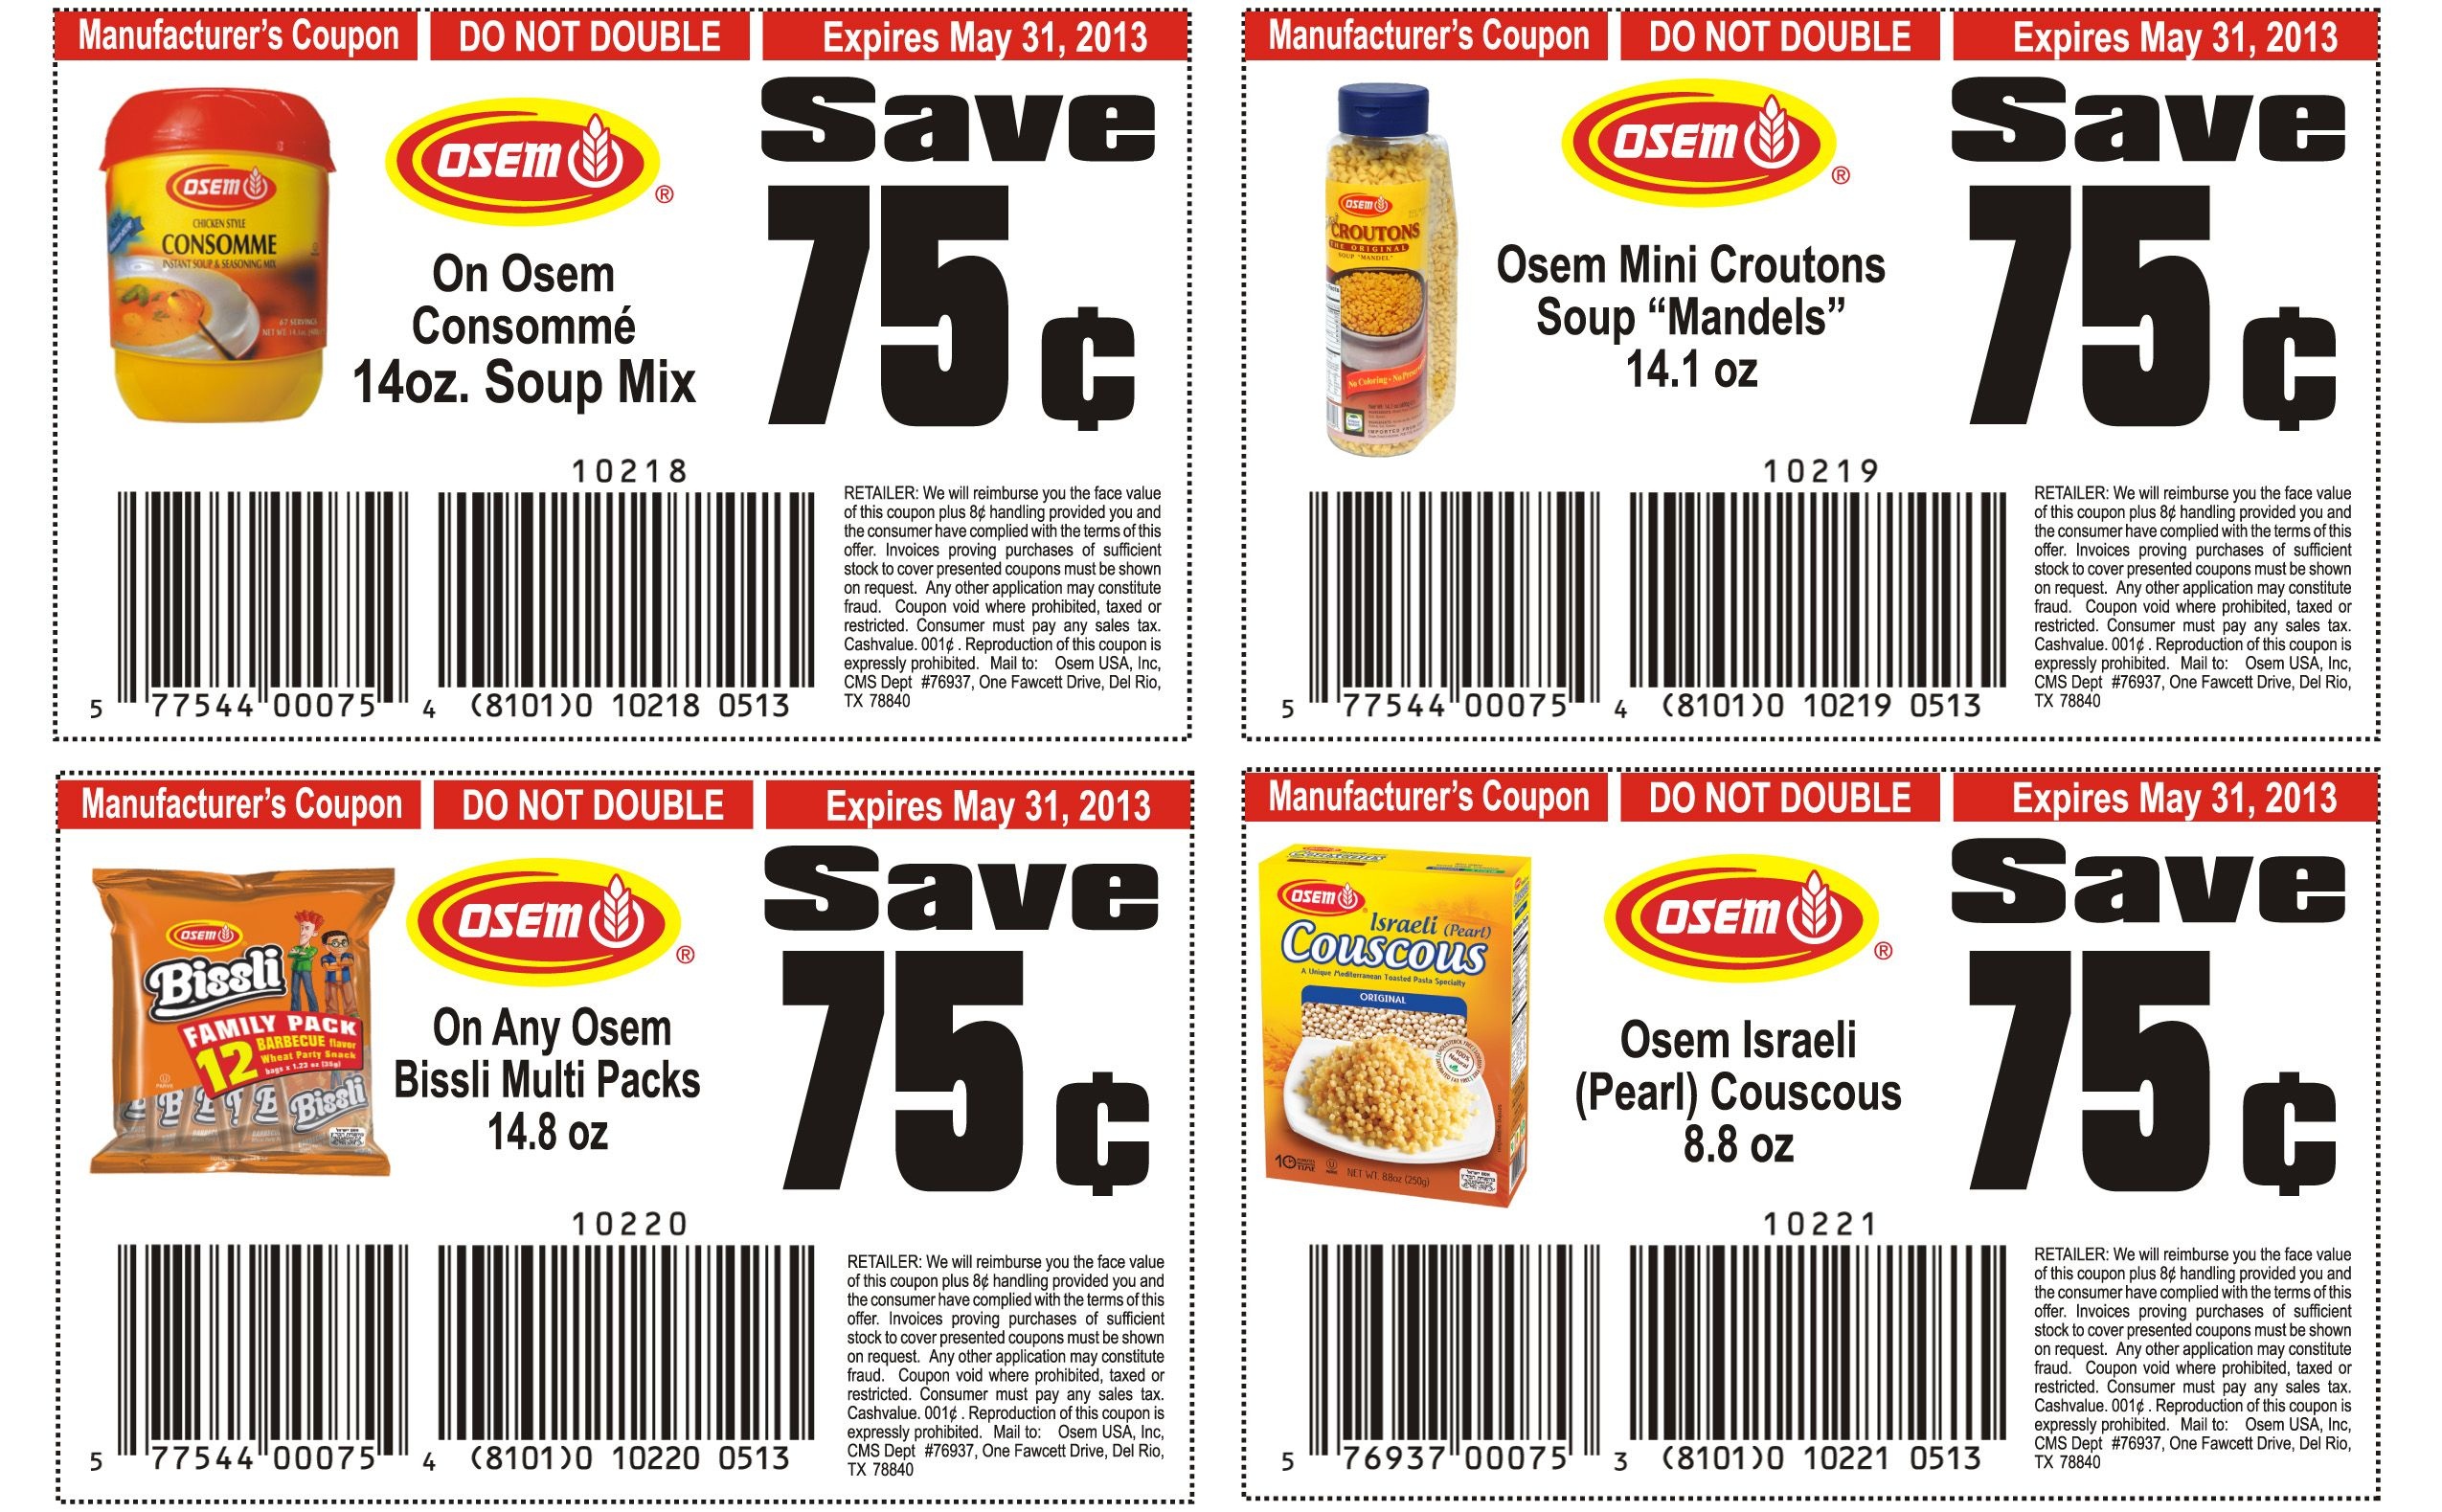 Food Coupons To Print | Osem List Of Healthy Food Printable Coupons - Free Printable Coupons For Food